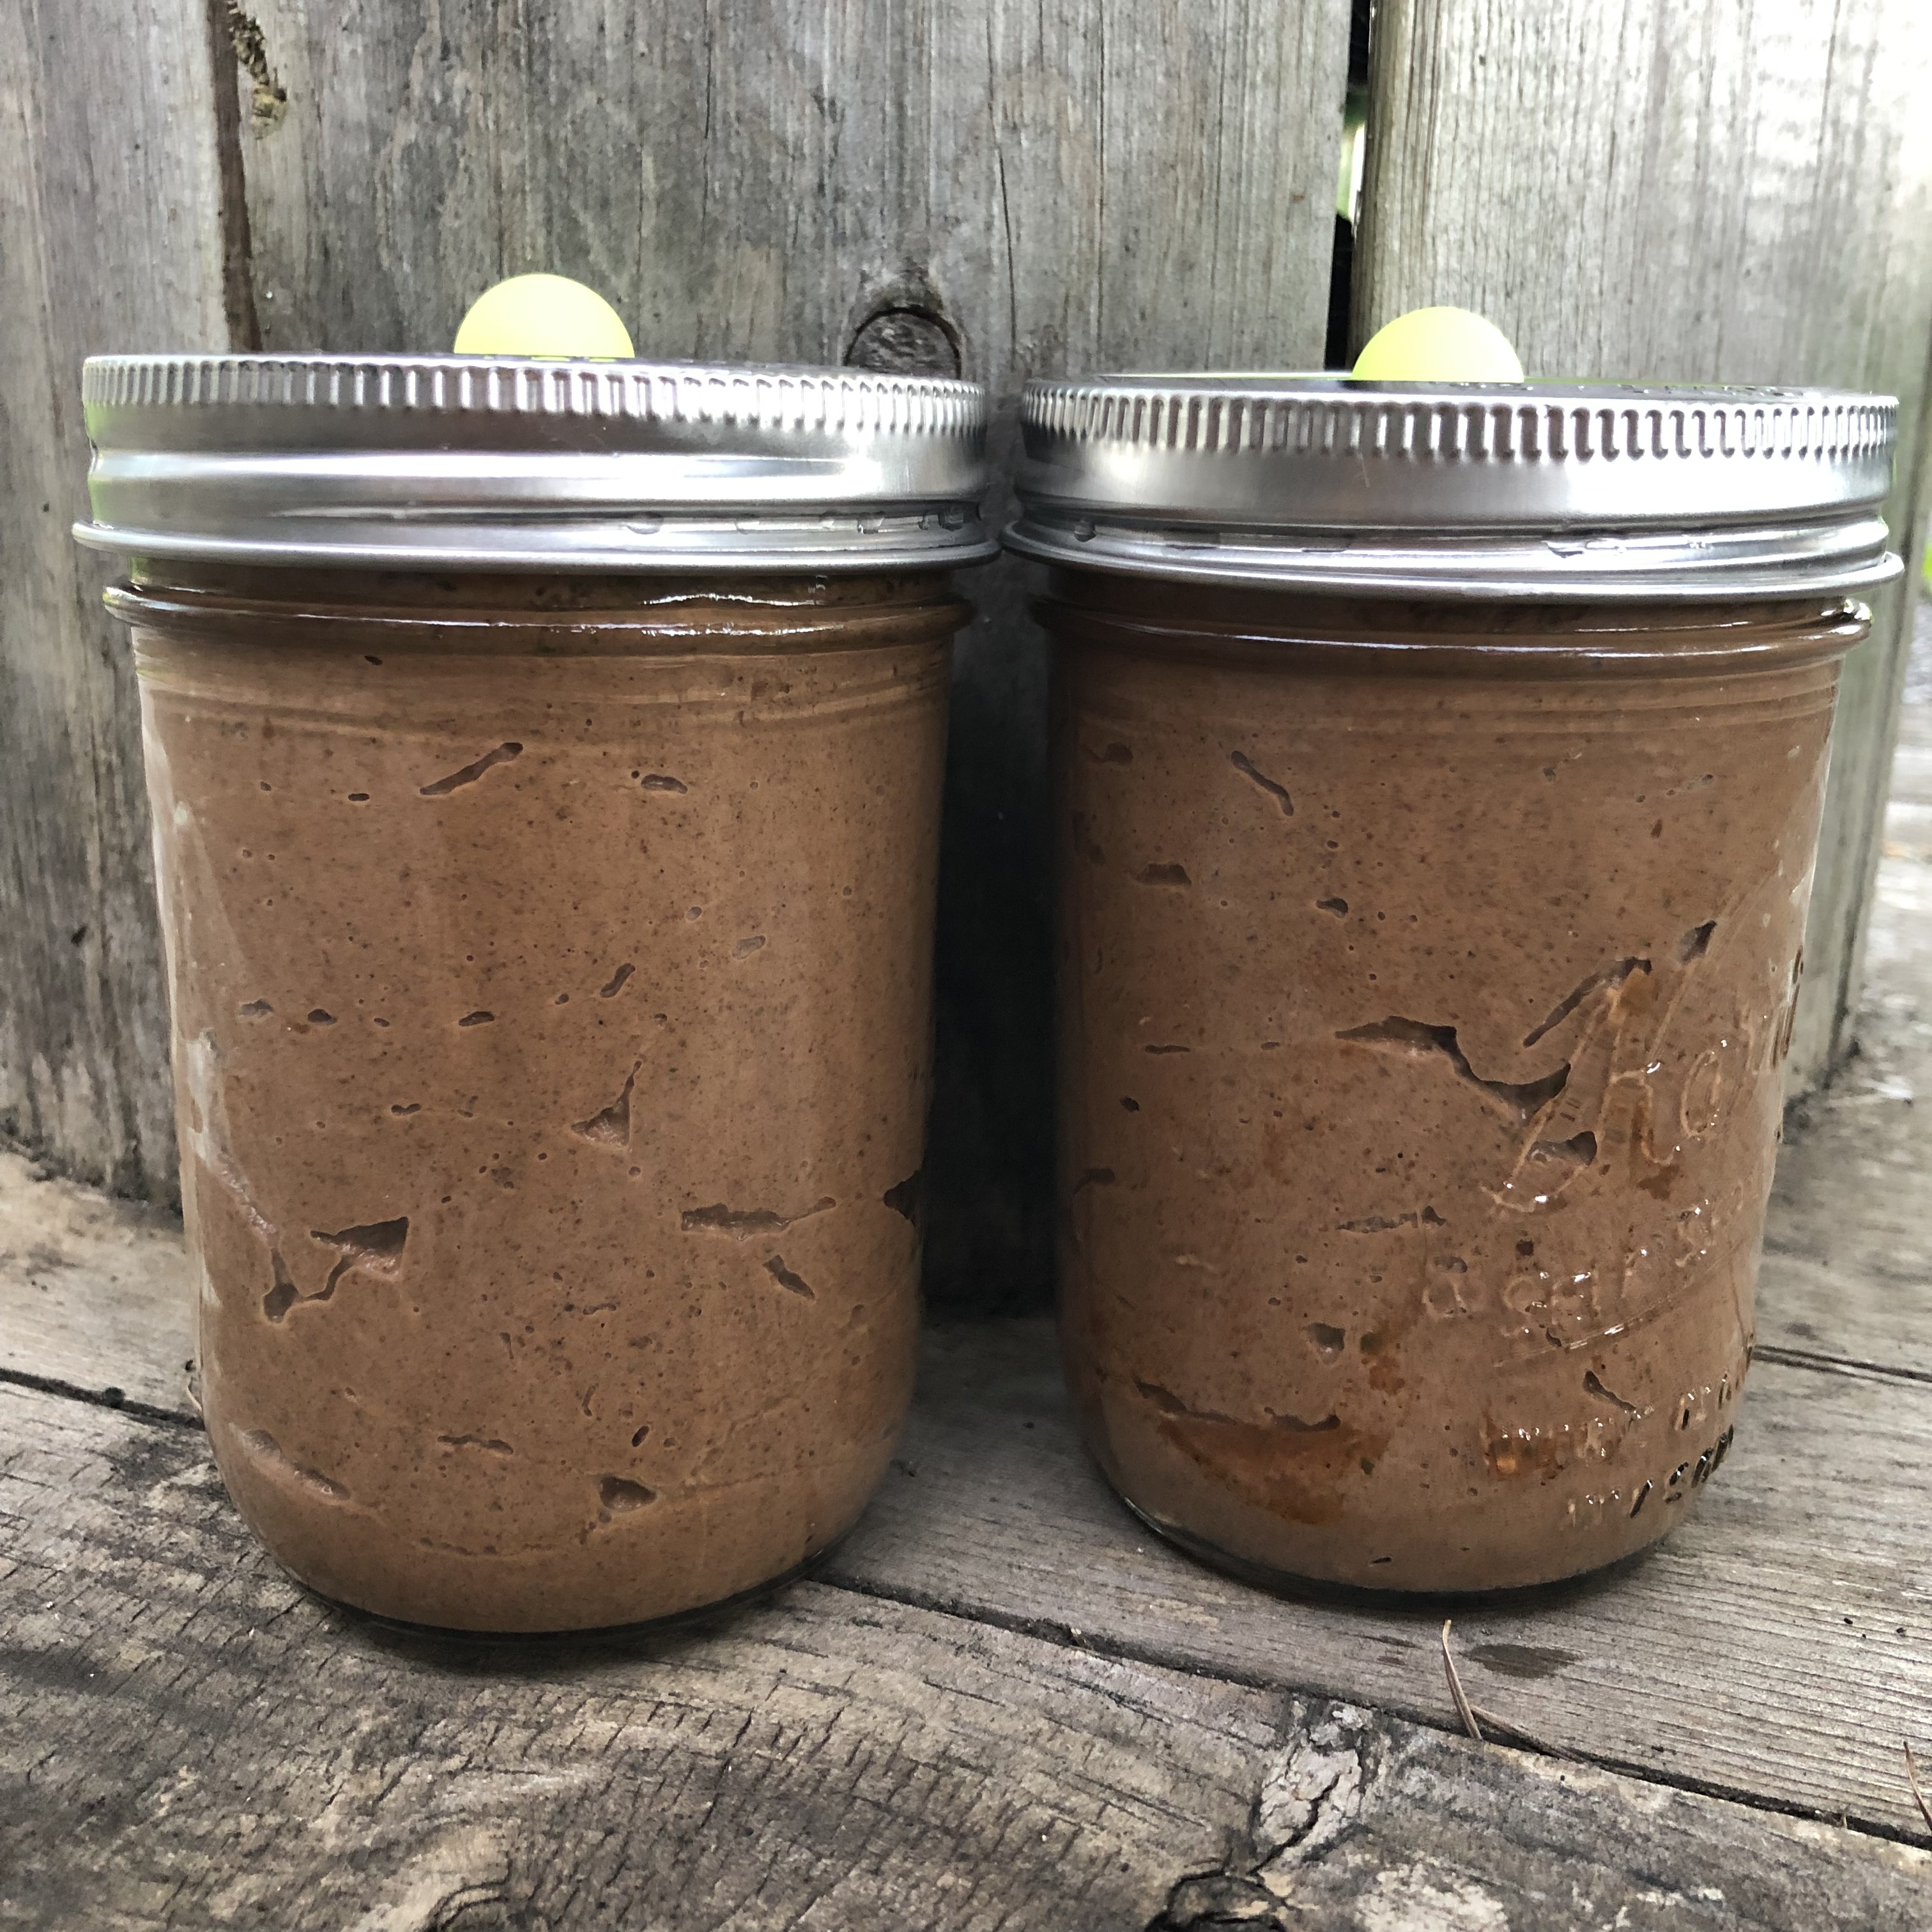 Cultured Vegan Mole Sauce. (Not authentic, but keto hacked, paleo and tasty)